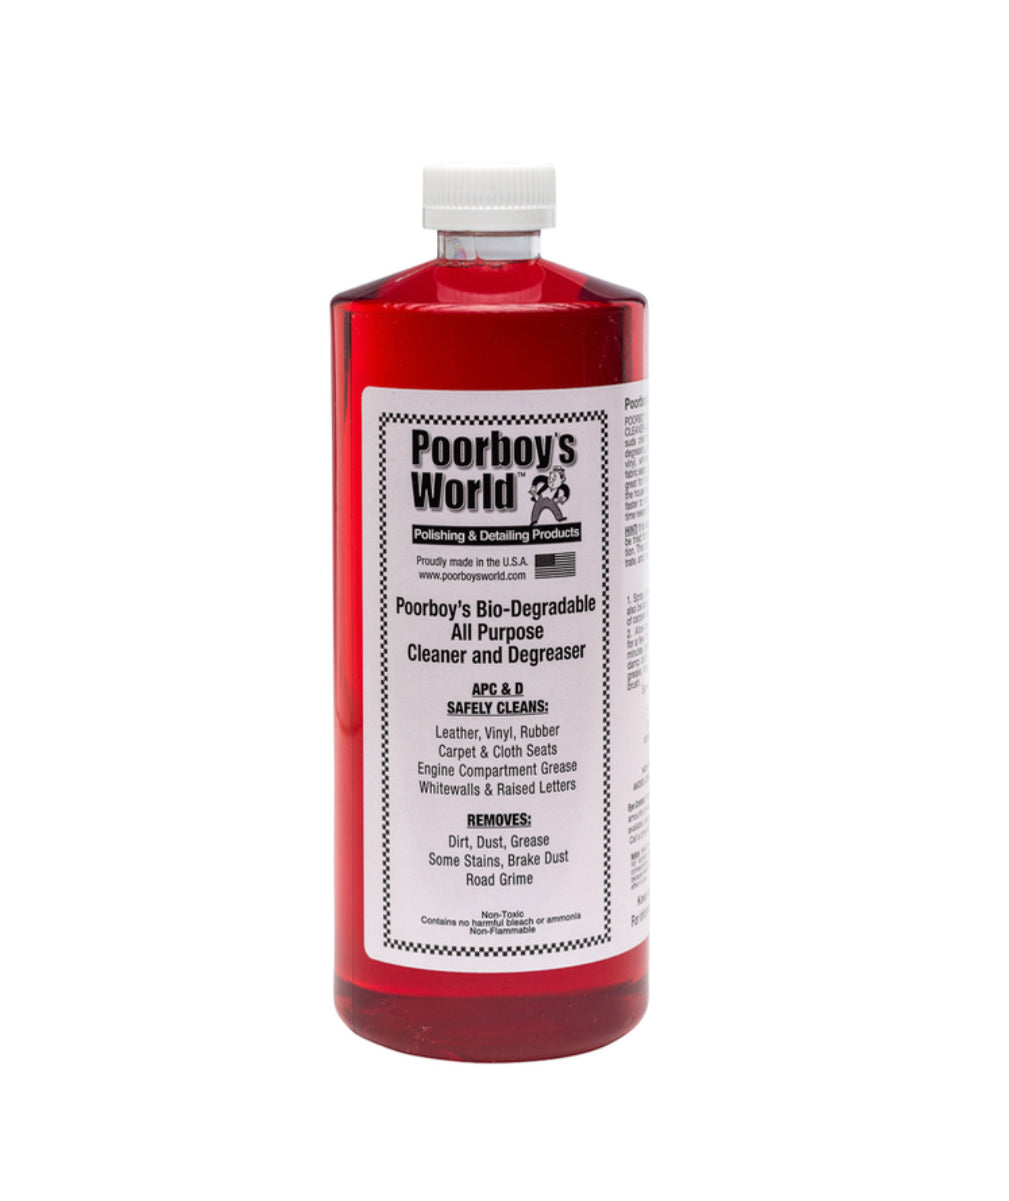 Poorboy's World APC - All Purpose Cleaner & Degreaser 32oz 946ml